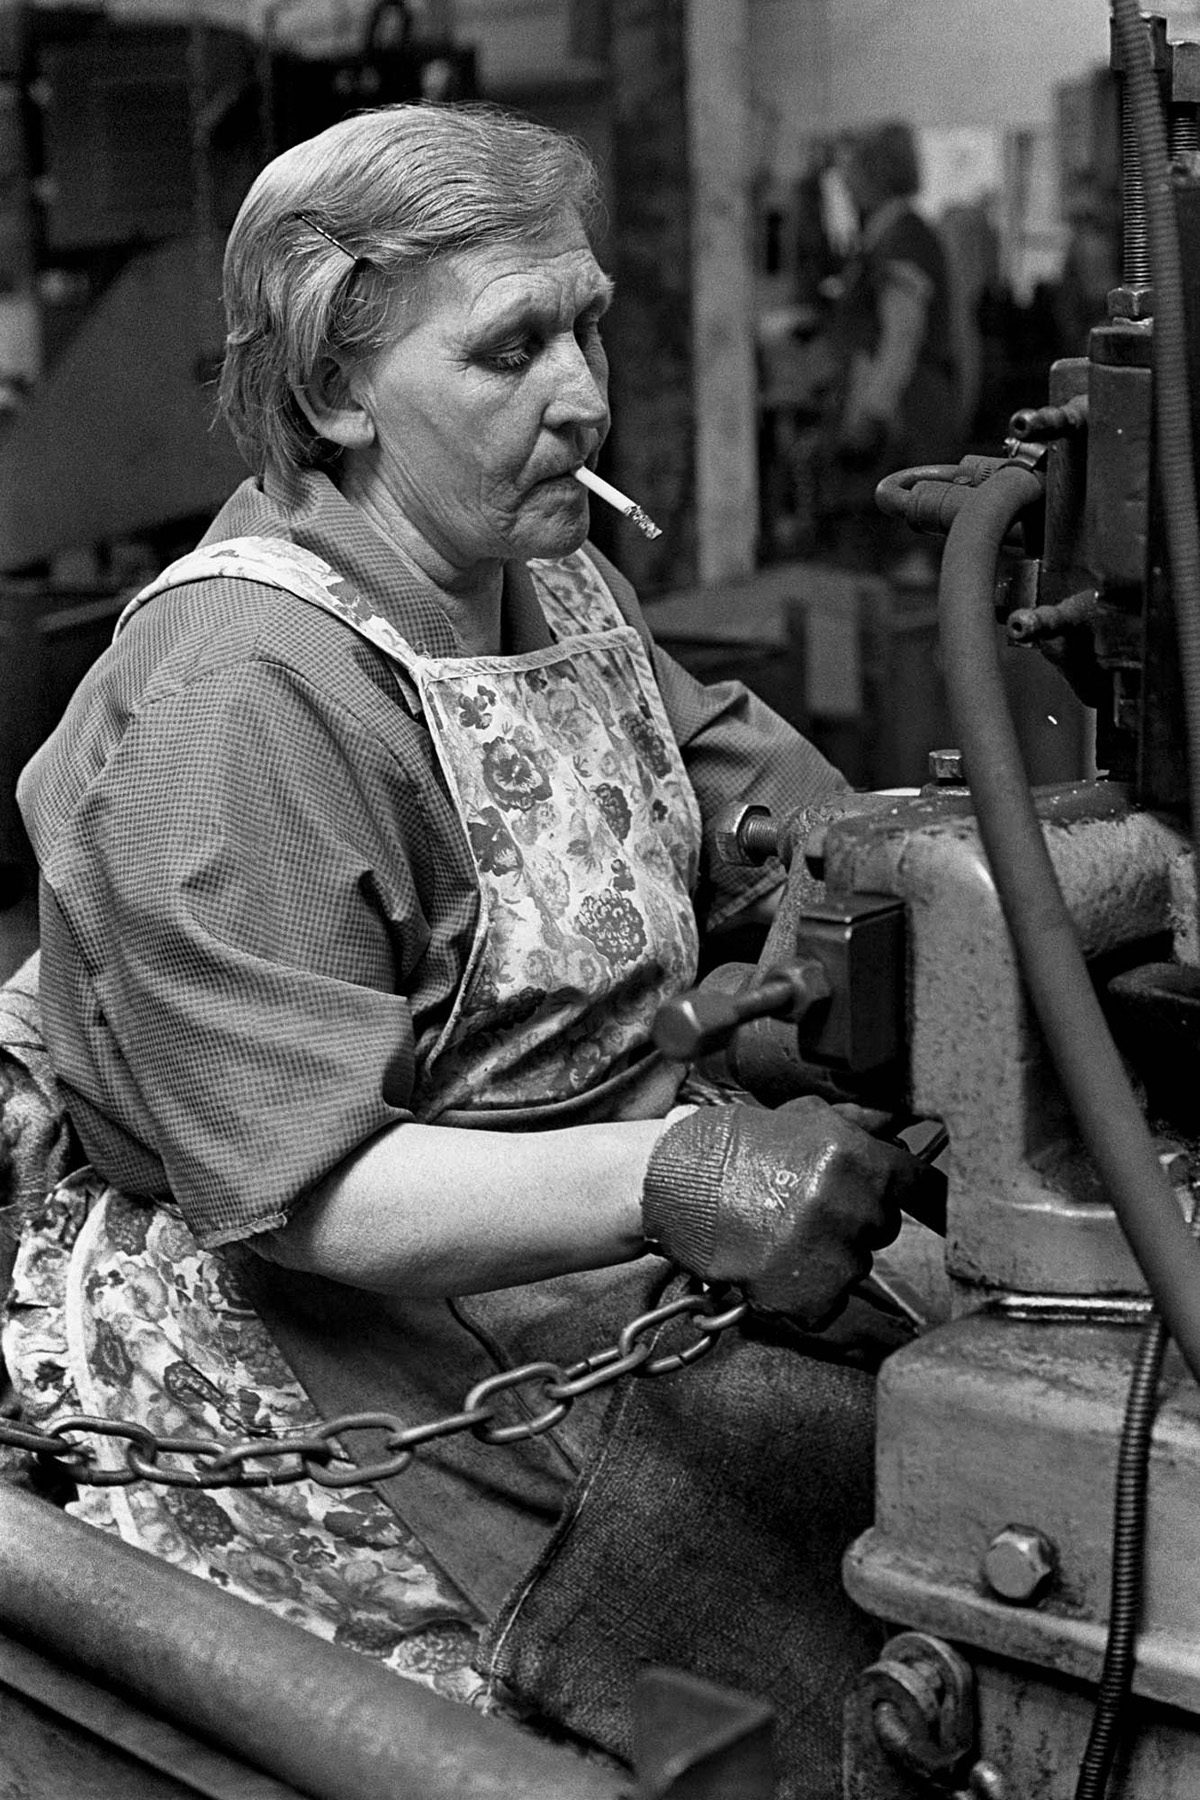 Black and white photograph from Vulcan's Forge showing a person smoking a cigarette while working on making a metal chain